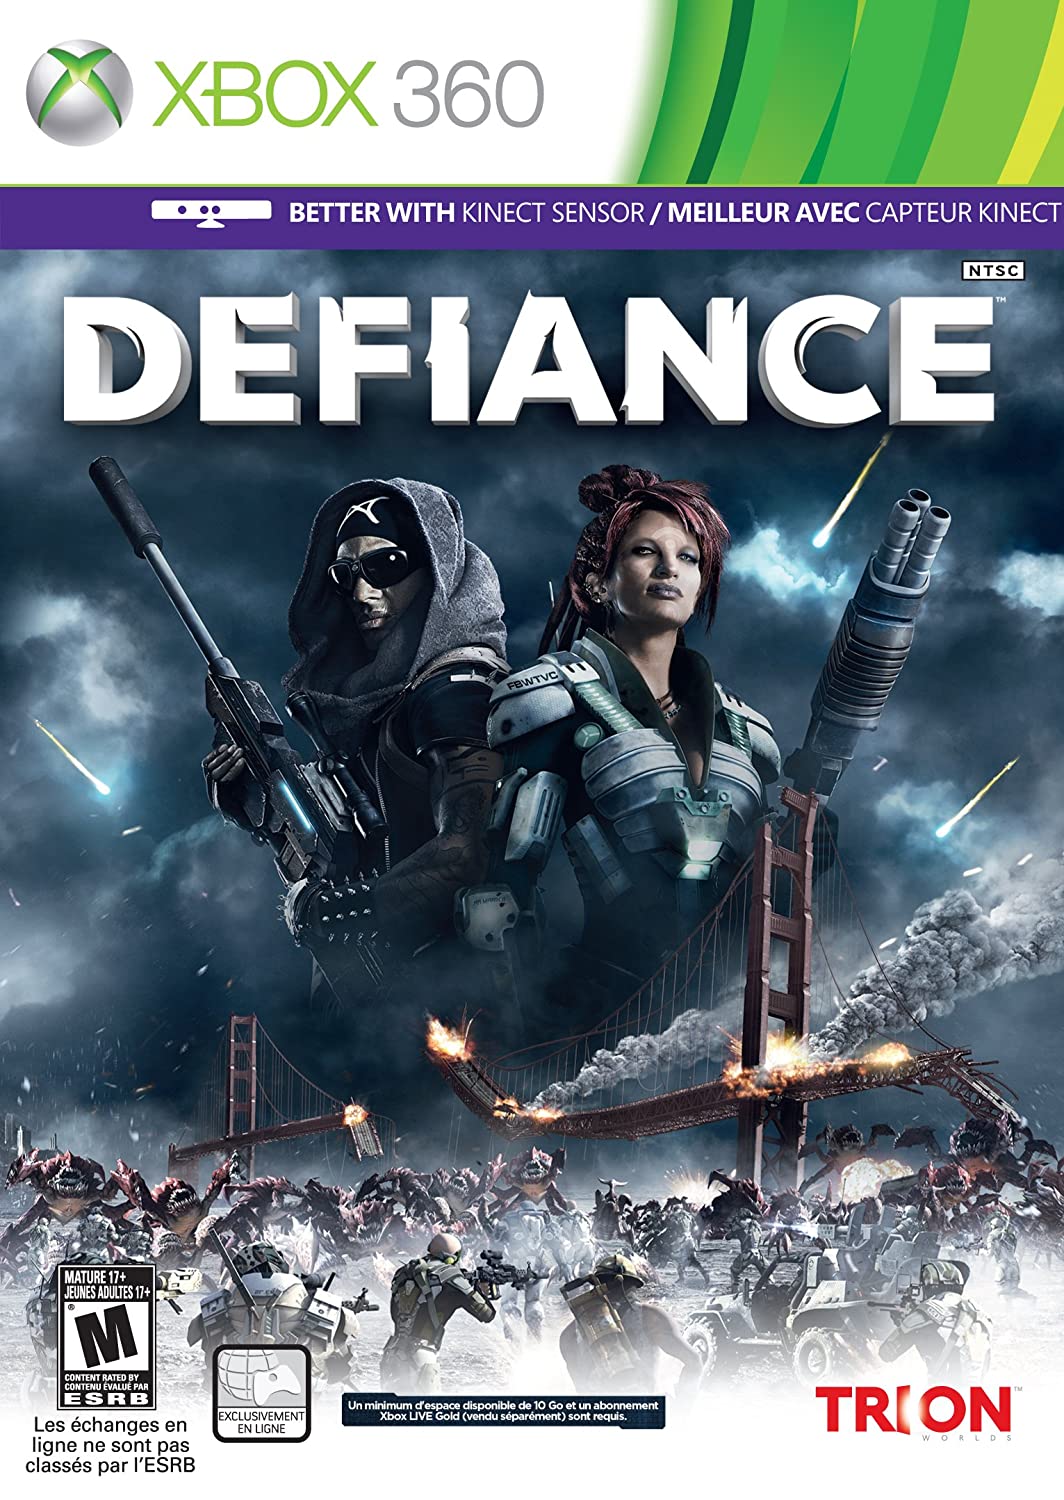 Defiance facts and statistics